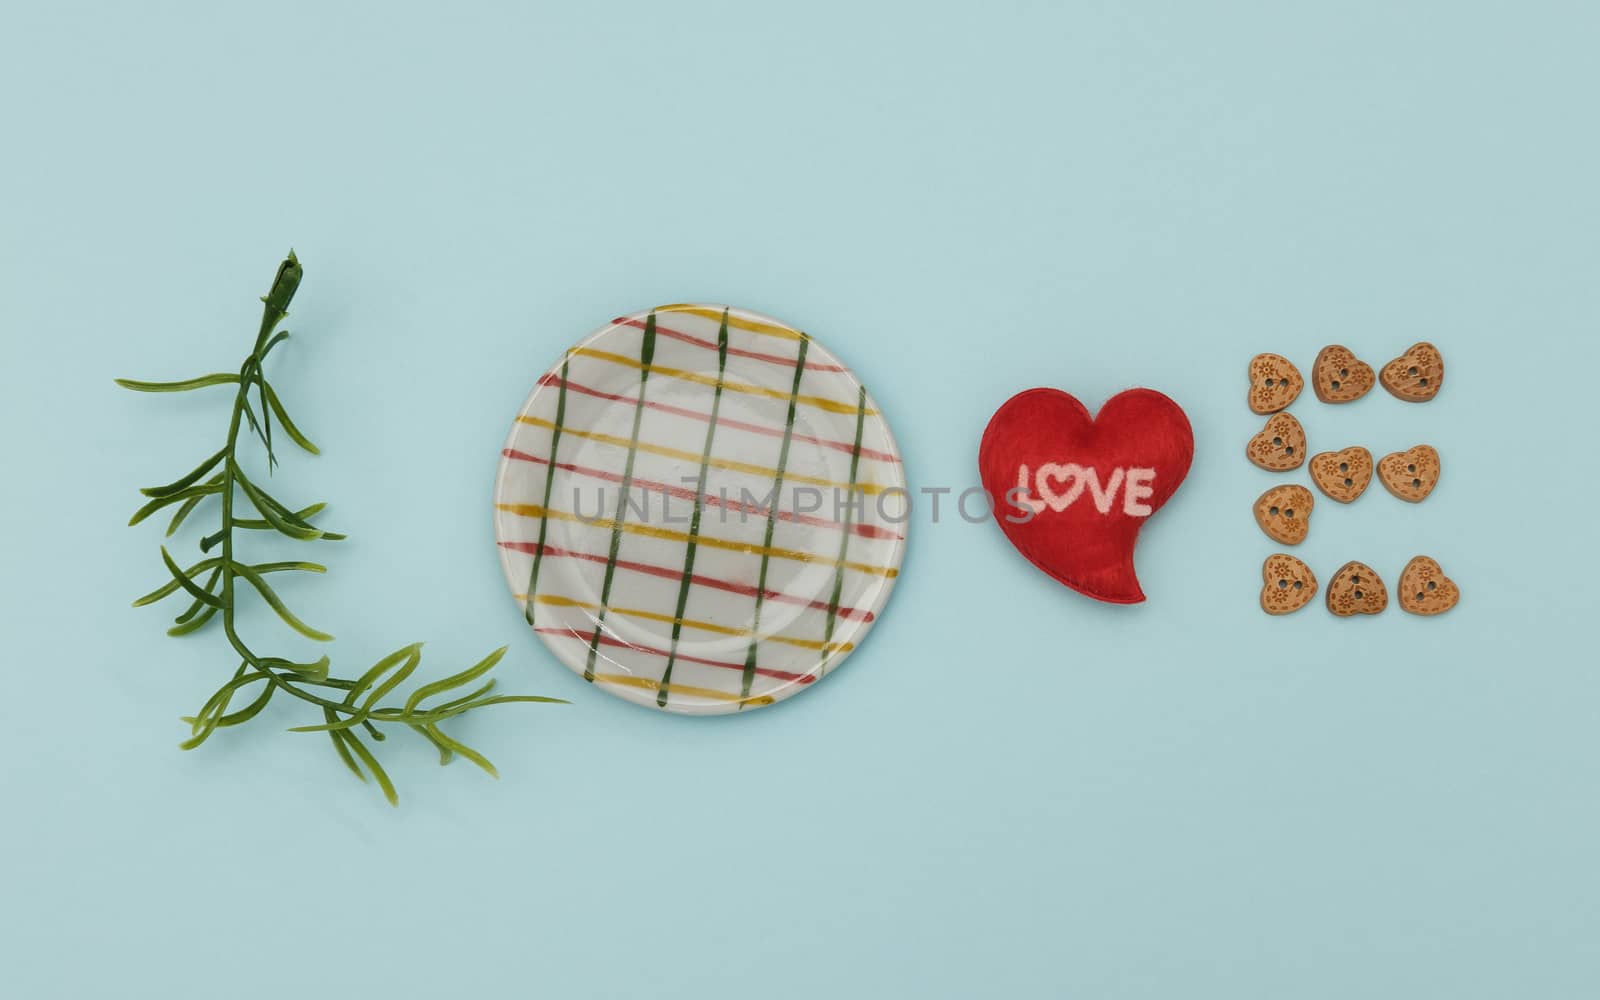 Words of love from leaves, dish, mini heart shape and wooden button on blue background, Valentine concept.